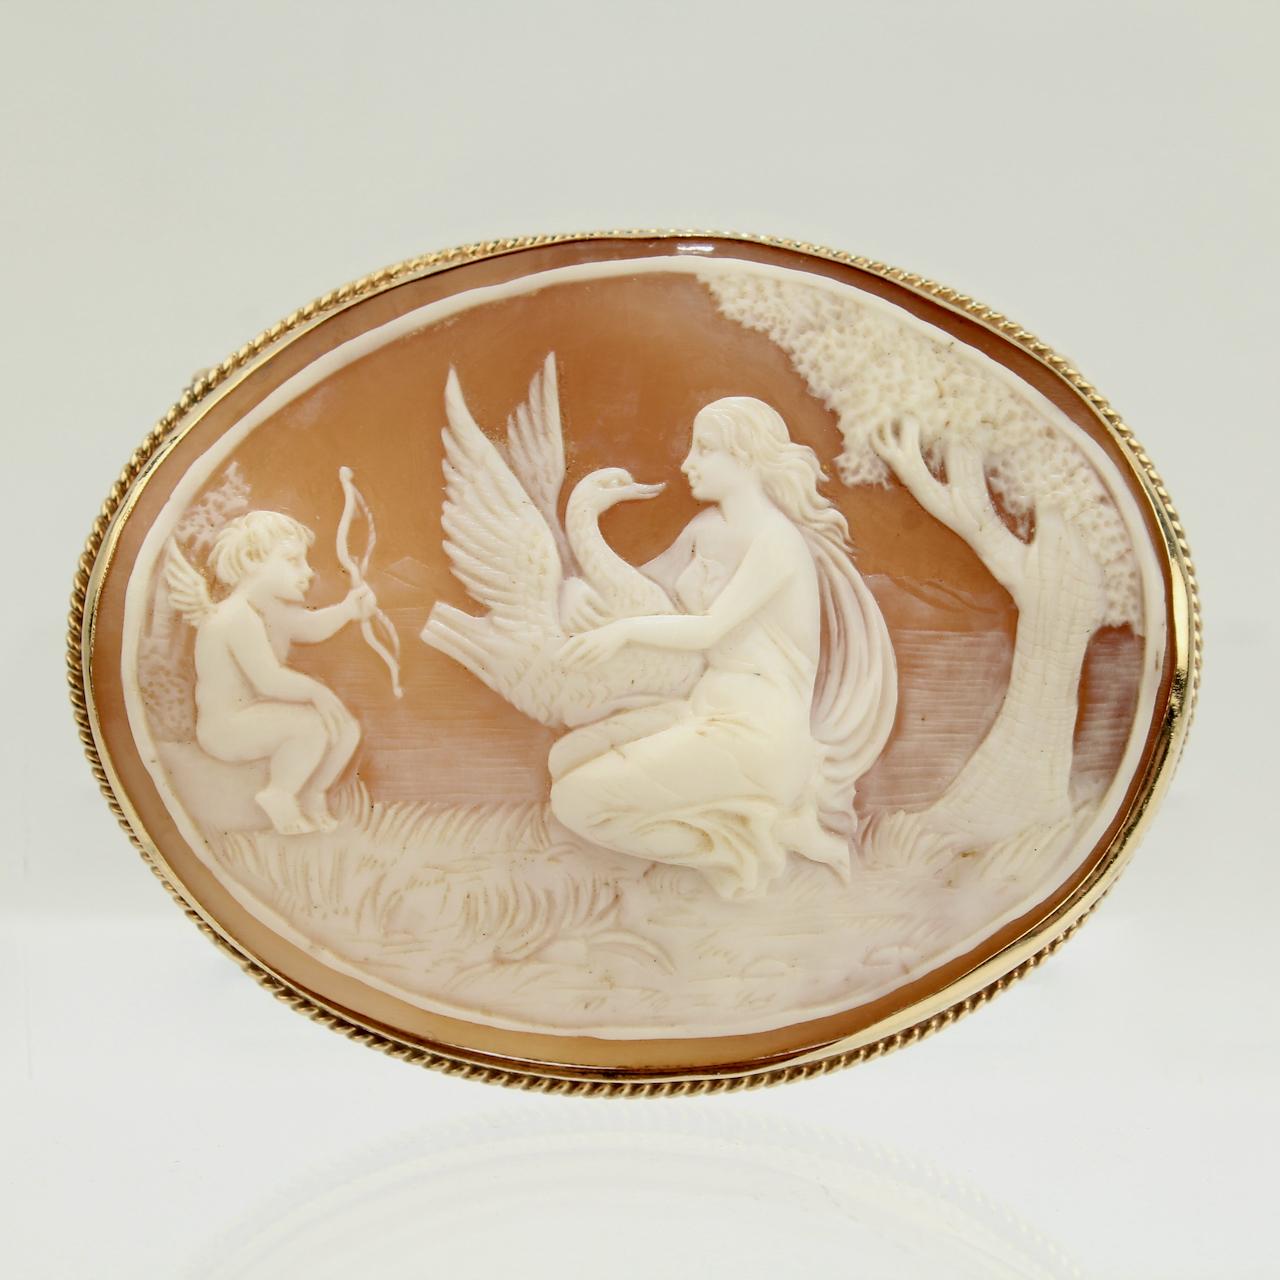 A very fine vintage carved cameo brooch.

Depicting the mythological scene of Leda & the Swan.

Carved with a scene of a swan, Leda, and Cupid by a tree. Bezel set in 14k gold.

Simply a wonderful, large scale cameo!

Date:
20th Century

Overall